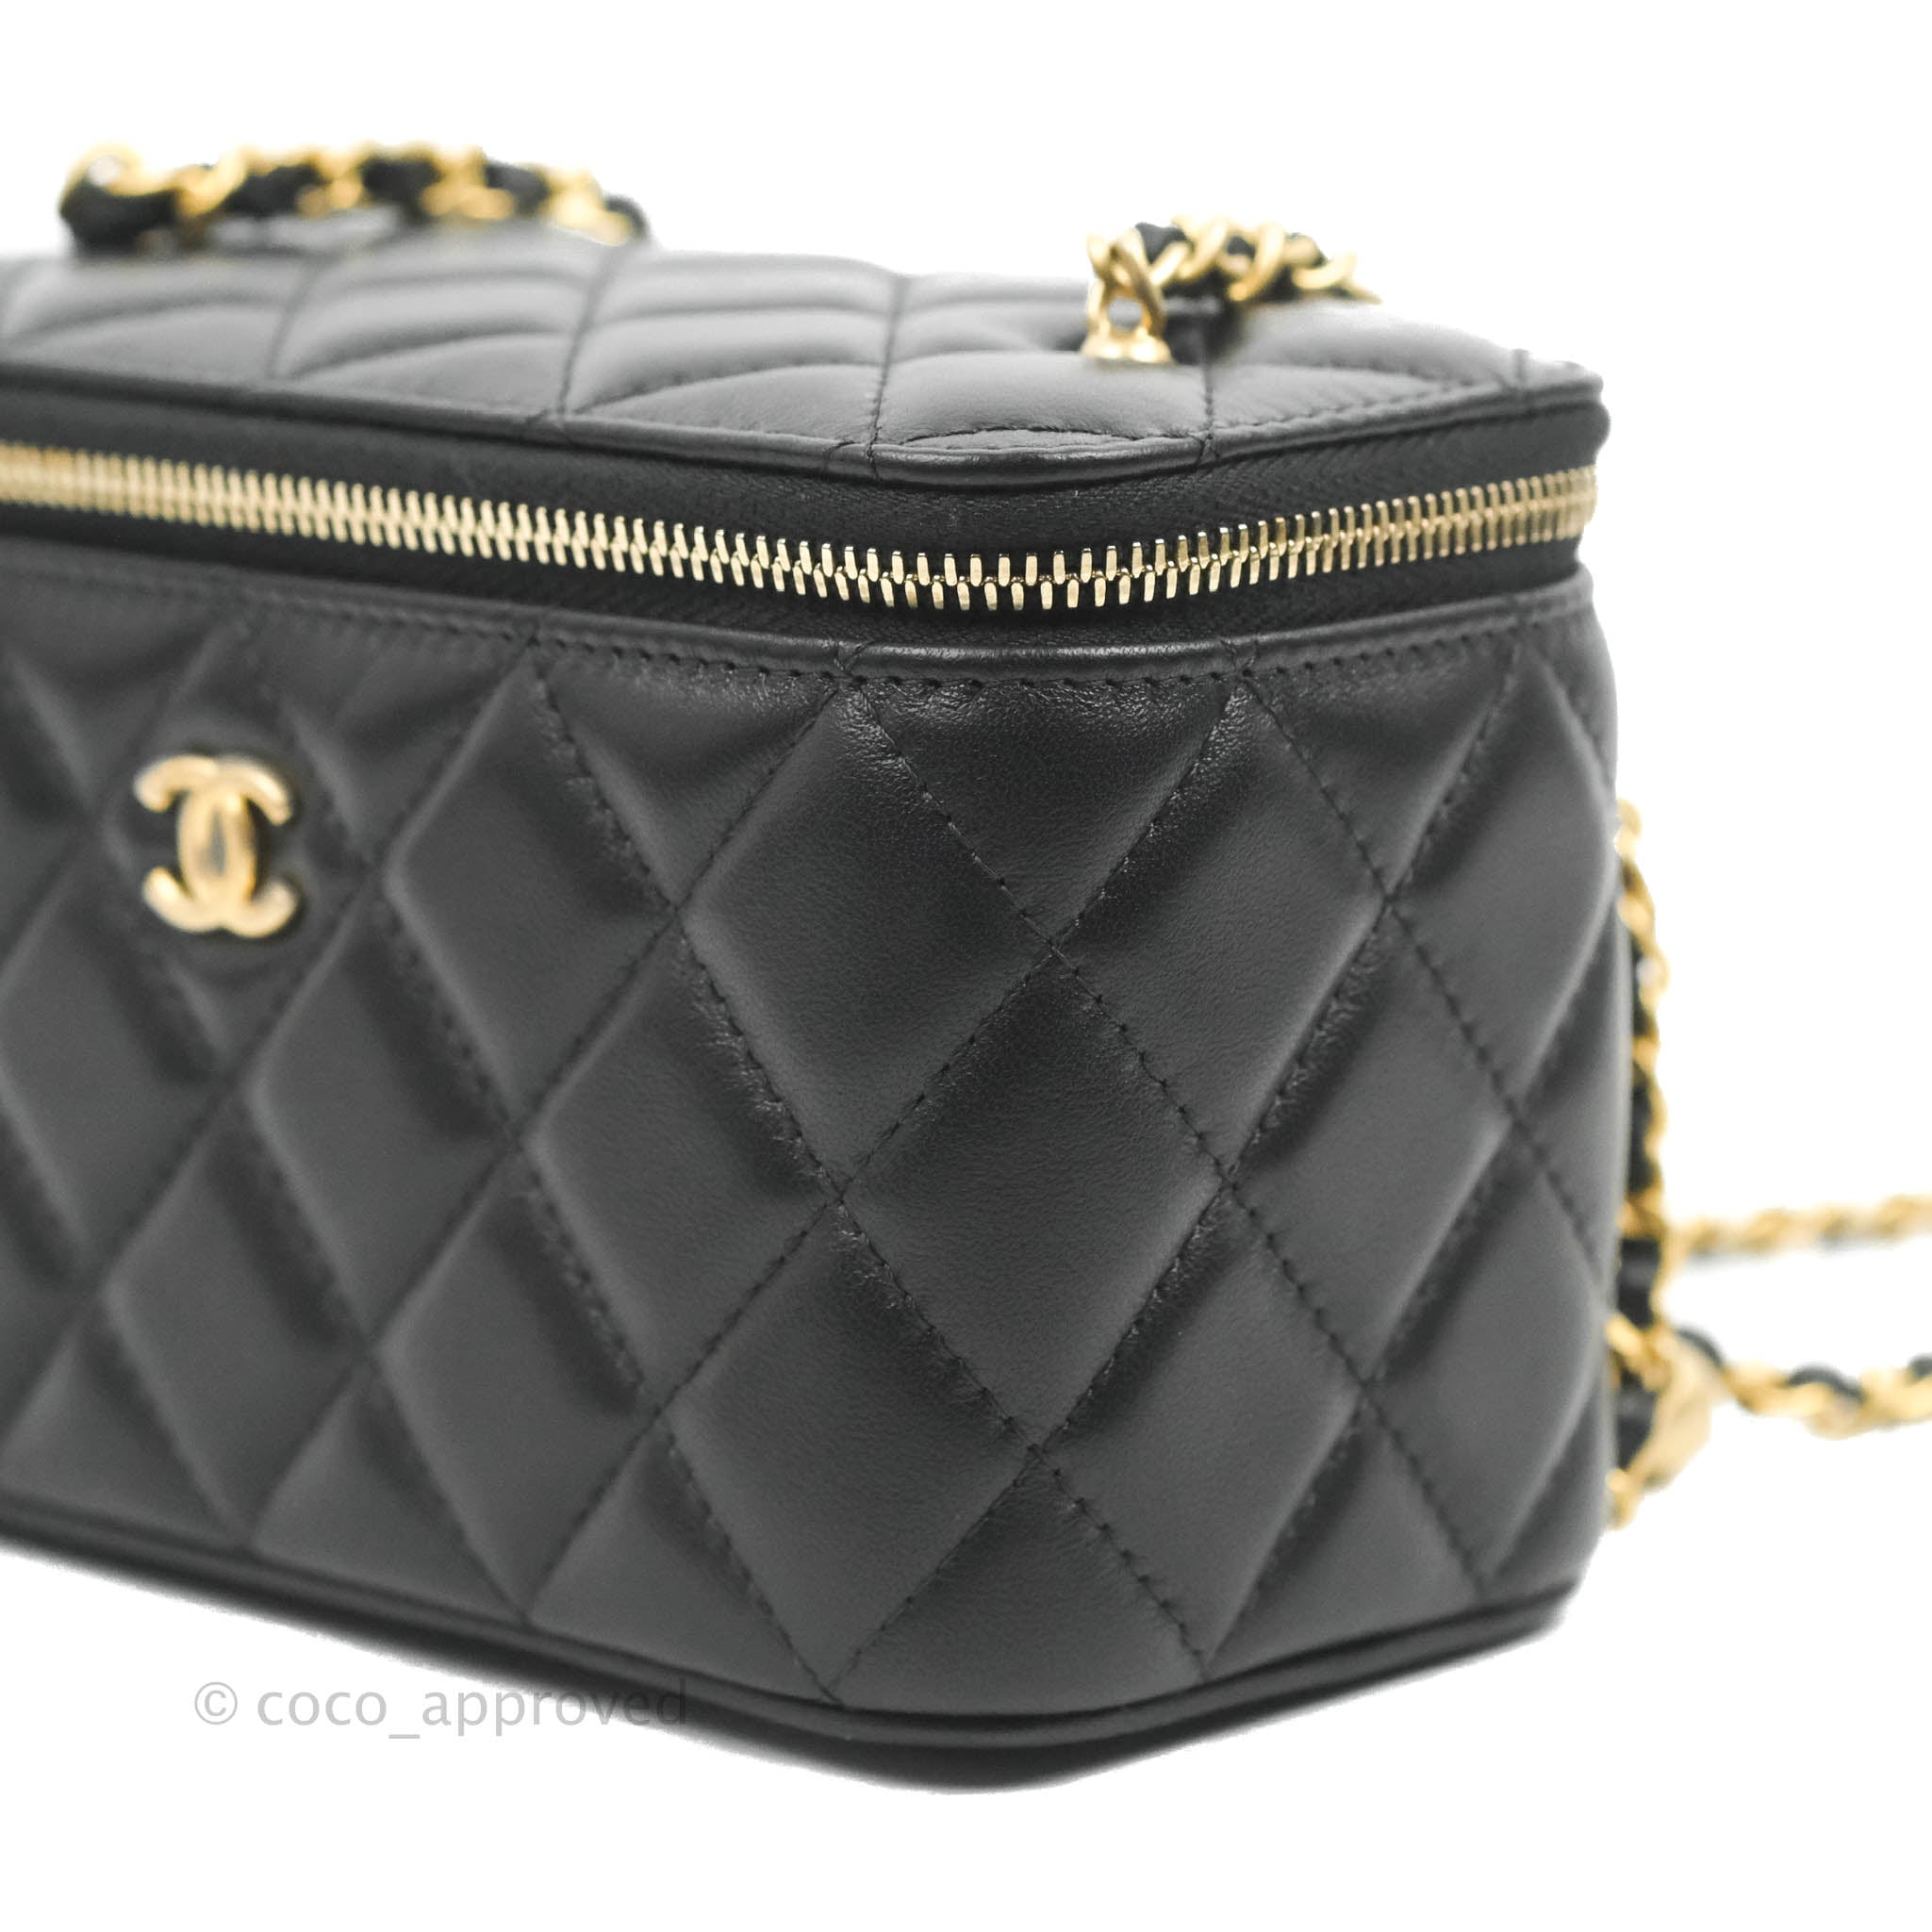 Chanel Pearl Crush Vanity With Chain Black Lambskin Aged Gold